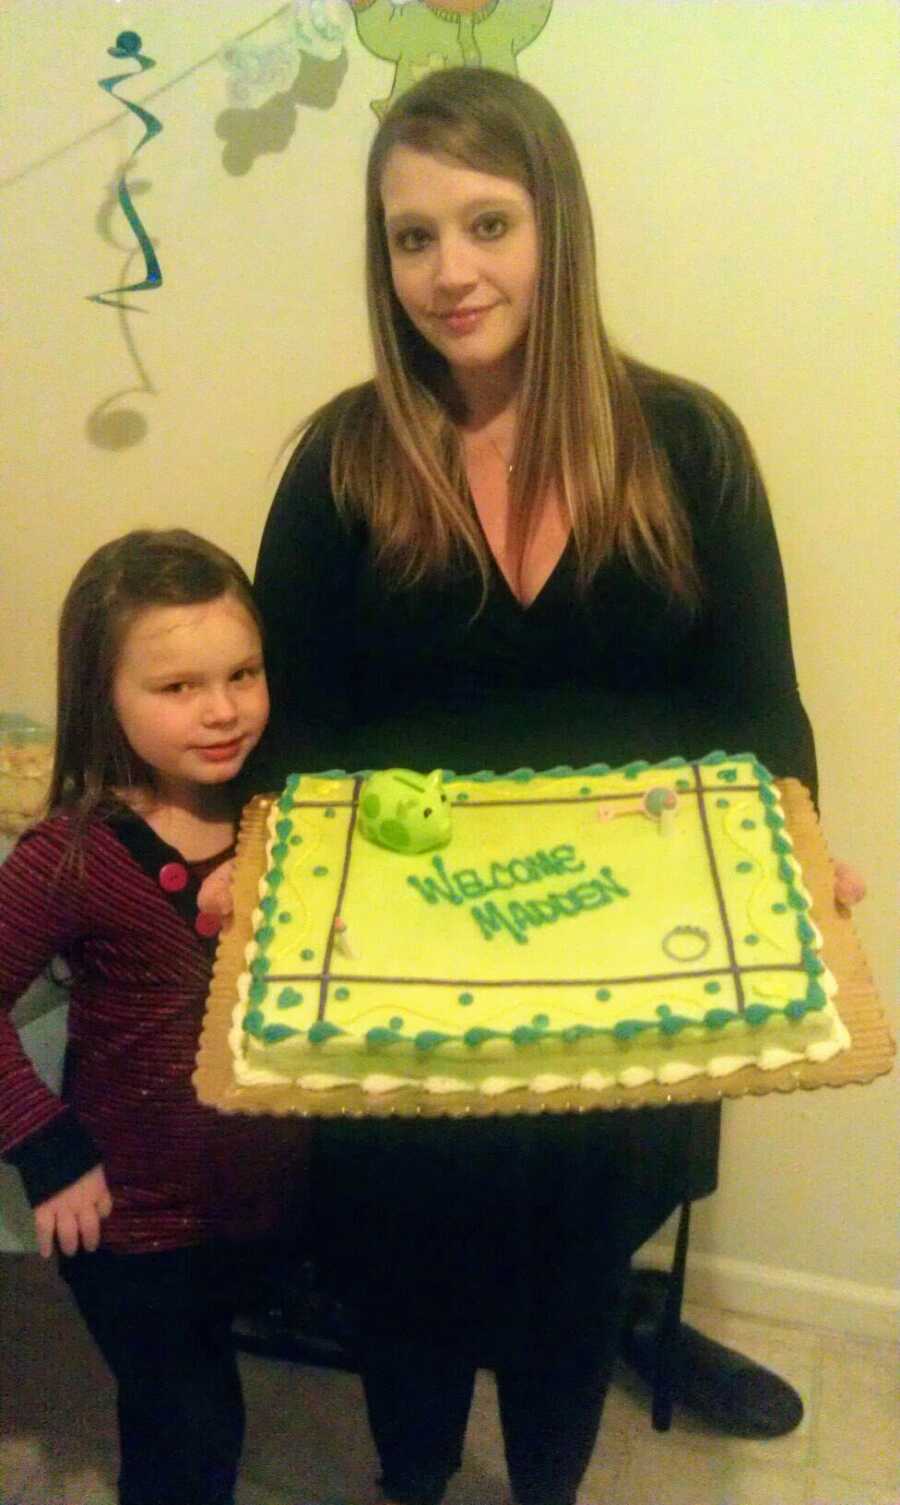 Mom holding a cake while standing next to her daughter.